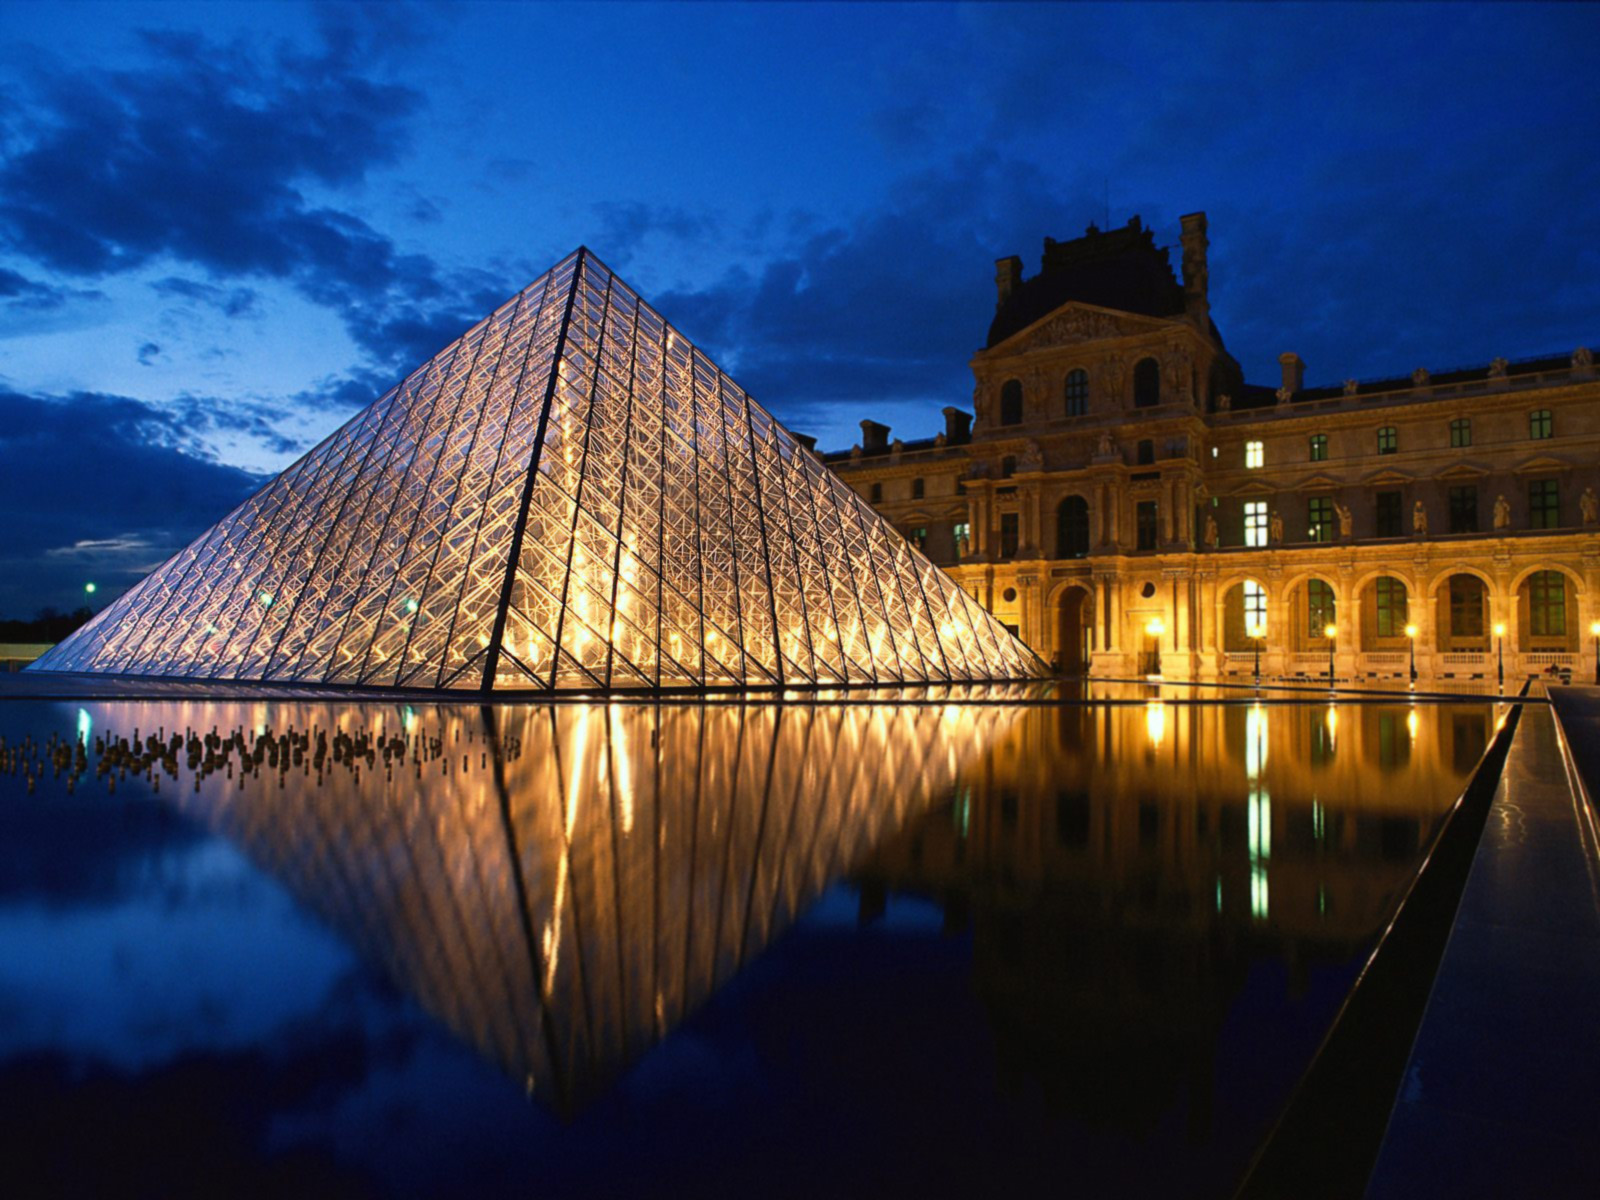 http://www.activeclub.com.ua/modules/gallery/d/3792-2/Pyramid+at+Louvre+Museum_+Paris_+France.jpg